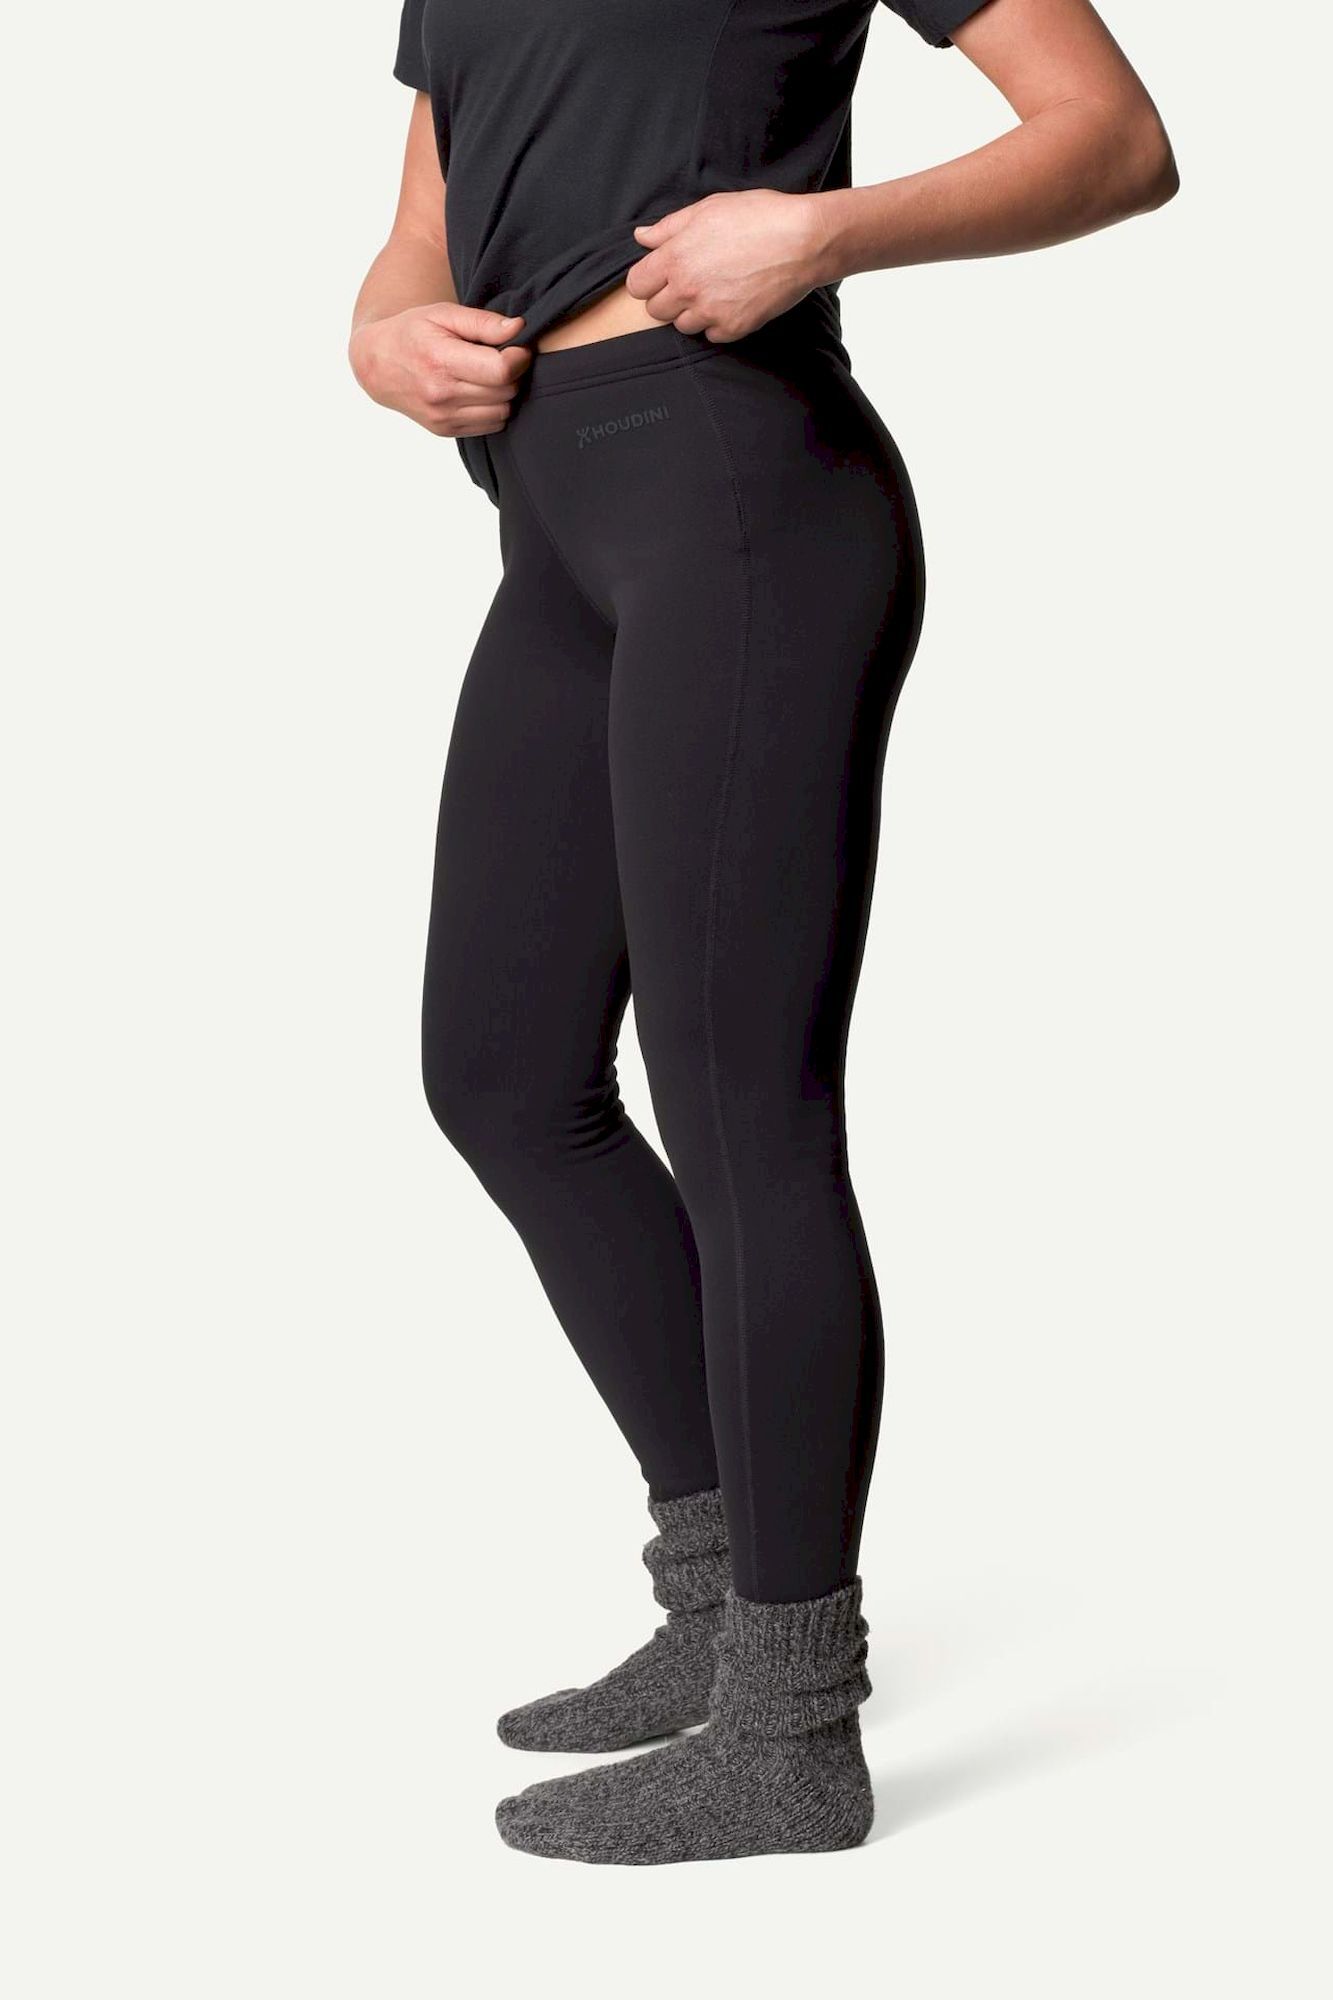 Houdini Sportswear Long Power Tights - Collant thermique femme | Hardloop